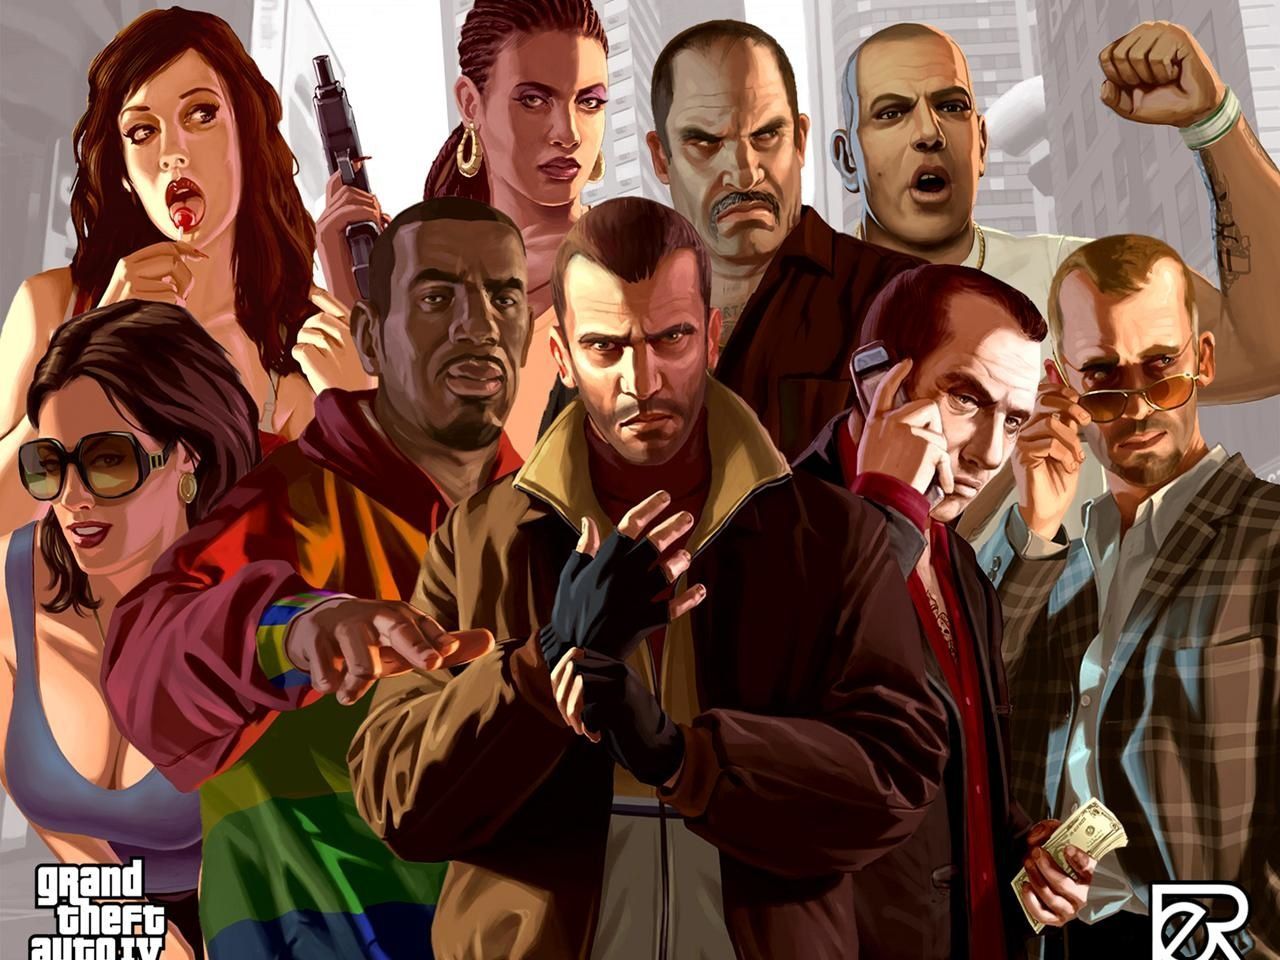 Grand Theft Auto Characters Wallpaper Free Grand Theft Auto Characters Background